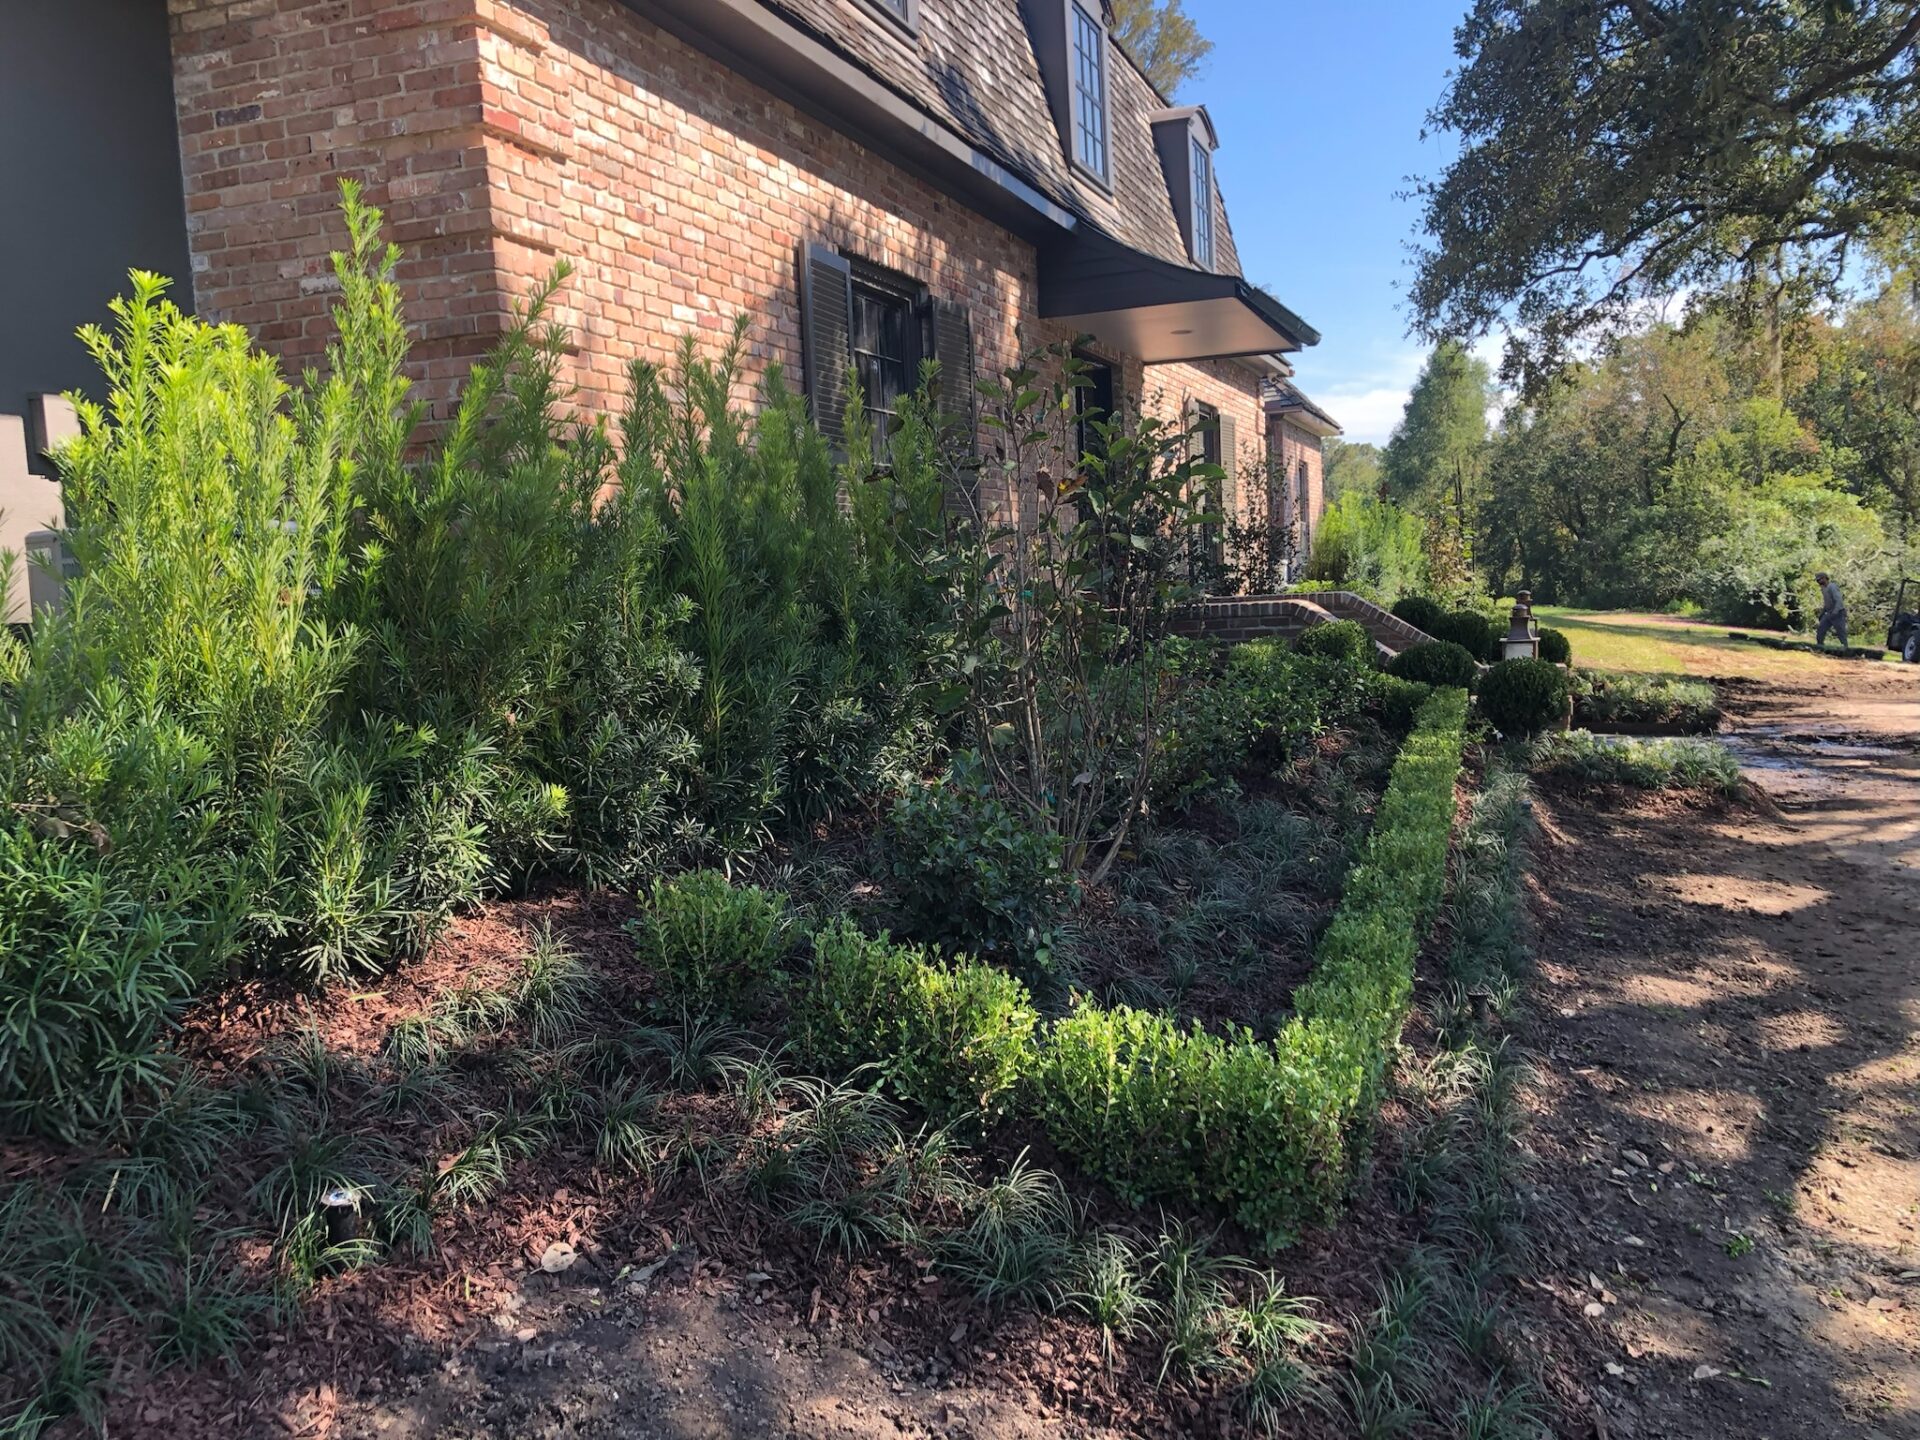 Butler Residence Landscape Design And Architecture - Baton Rouge